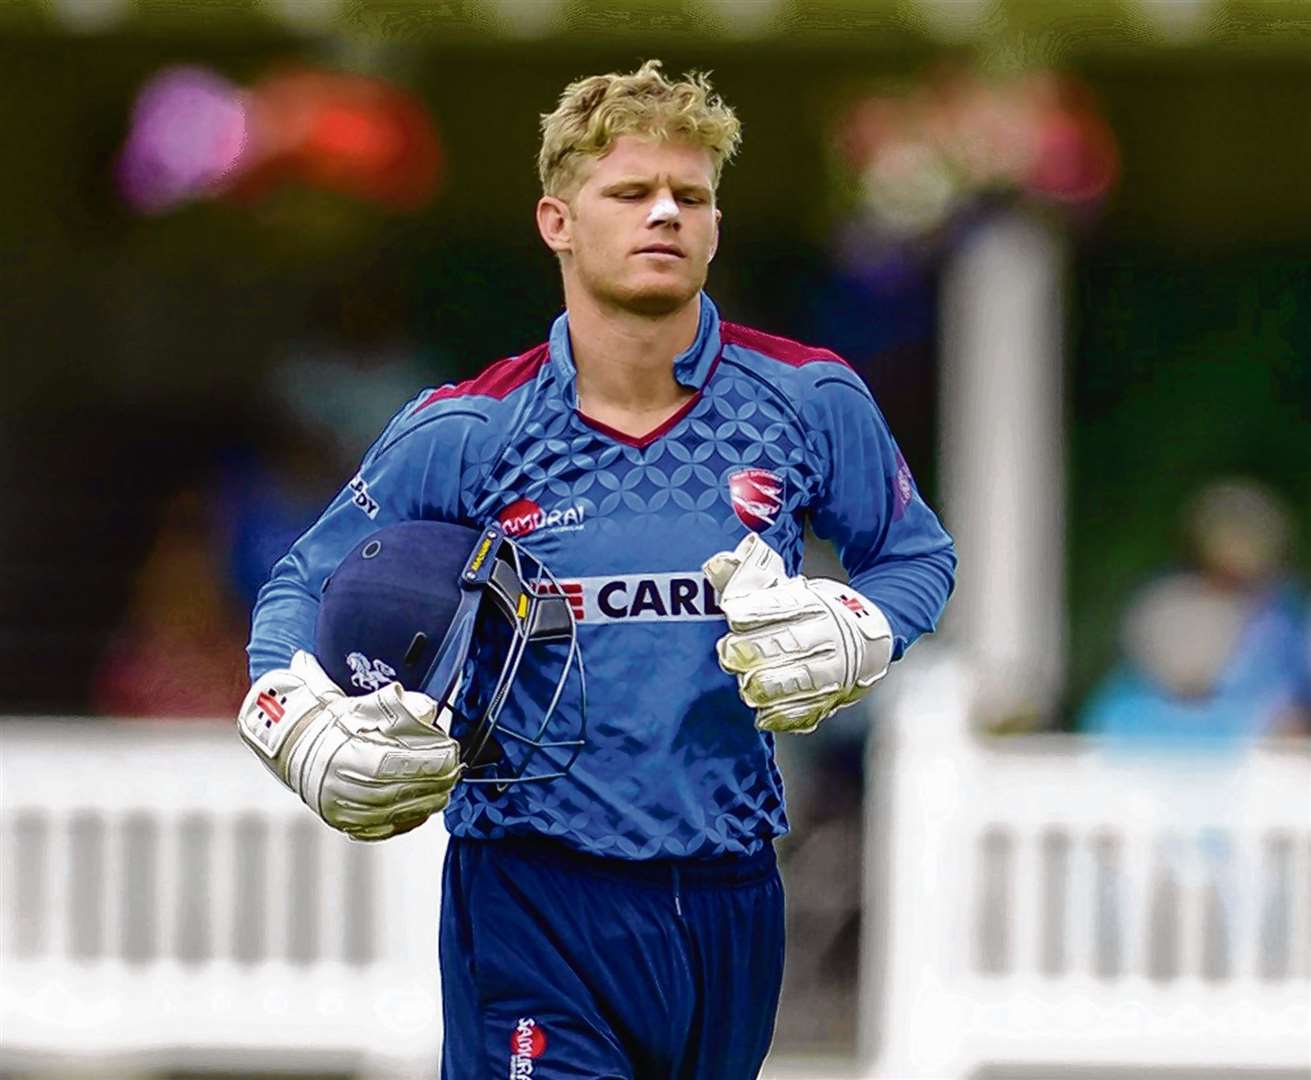 Sam Billings discovered he had skin cancer following a screening offered by his club. Picture: Barry Goodwin